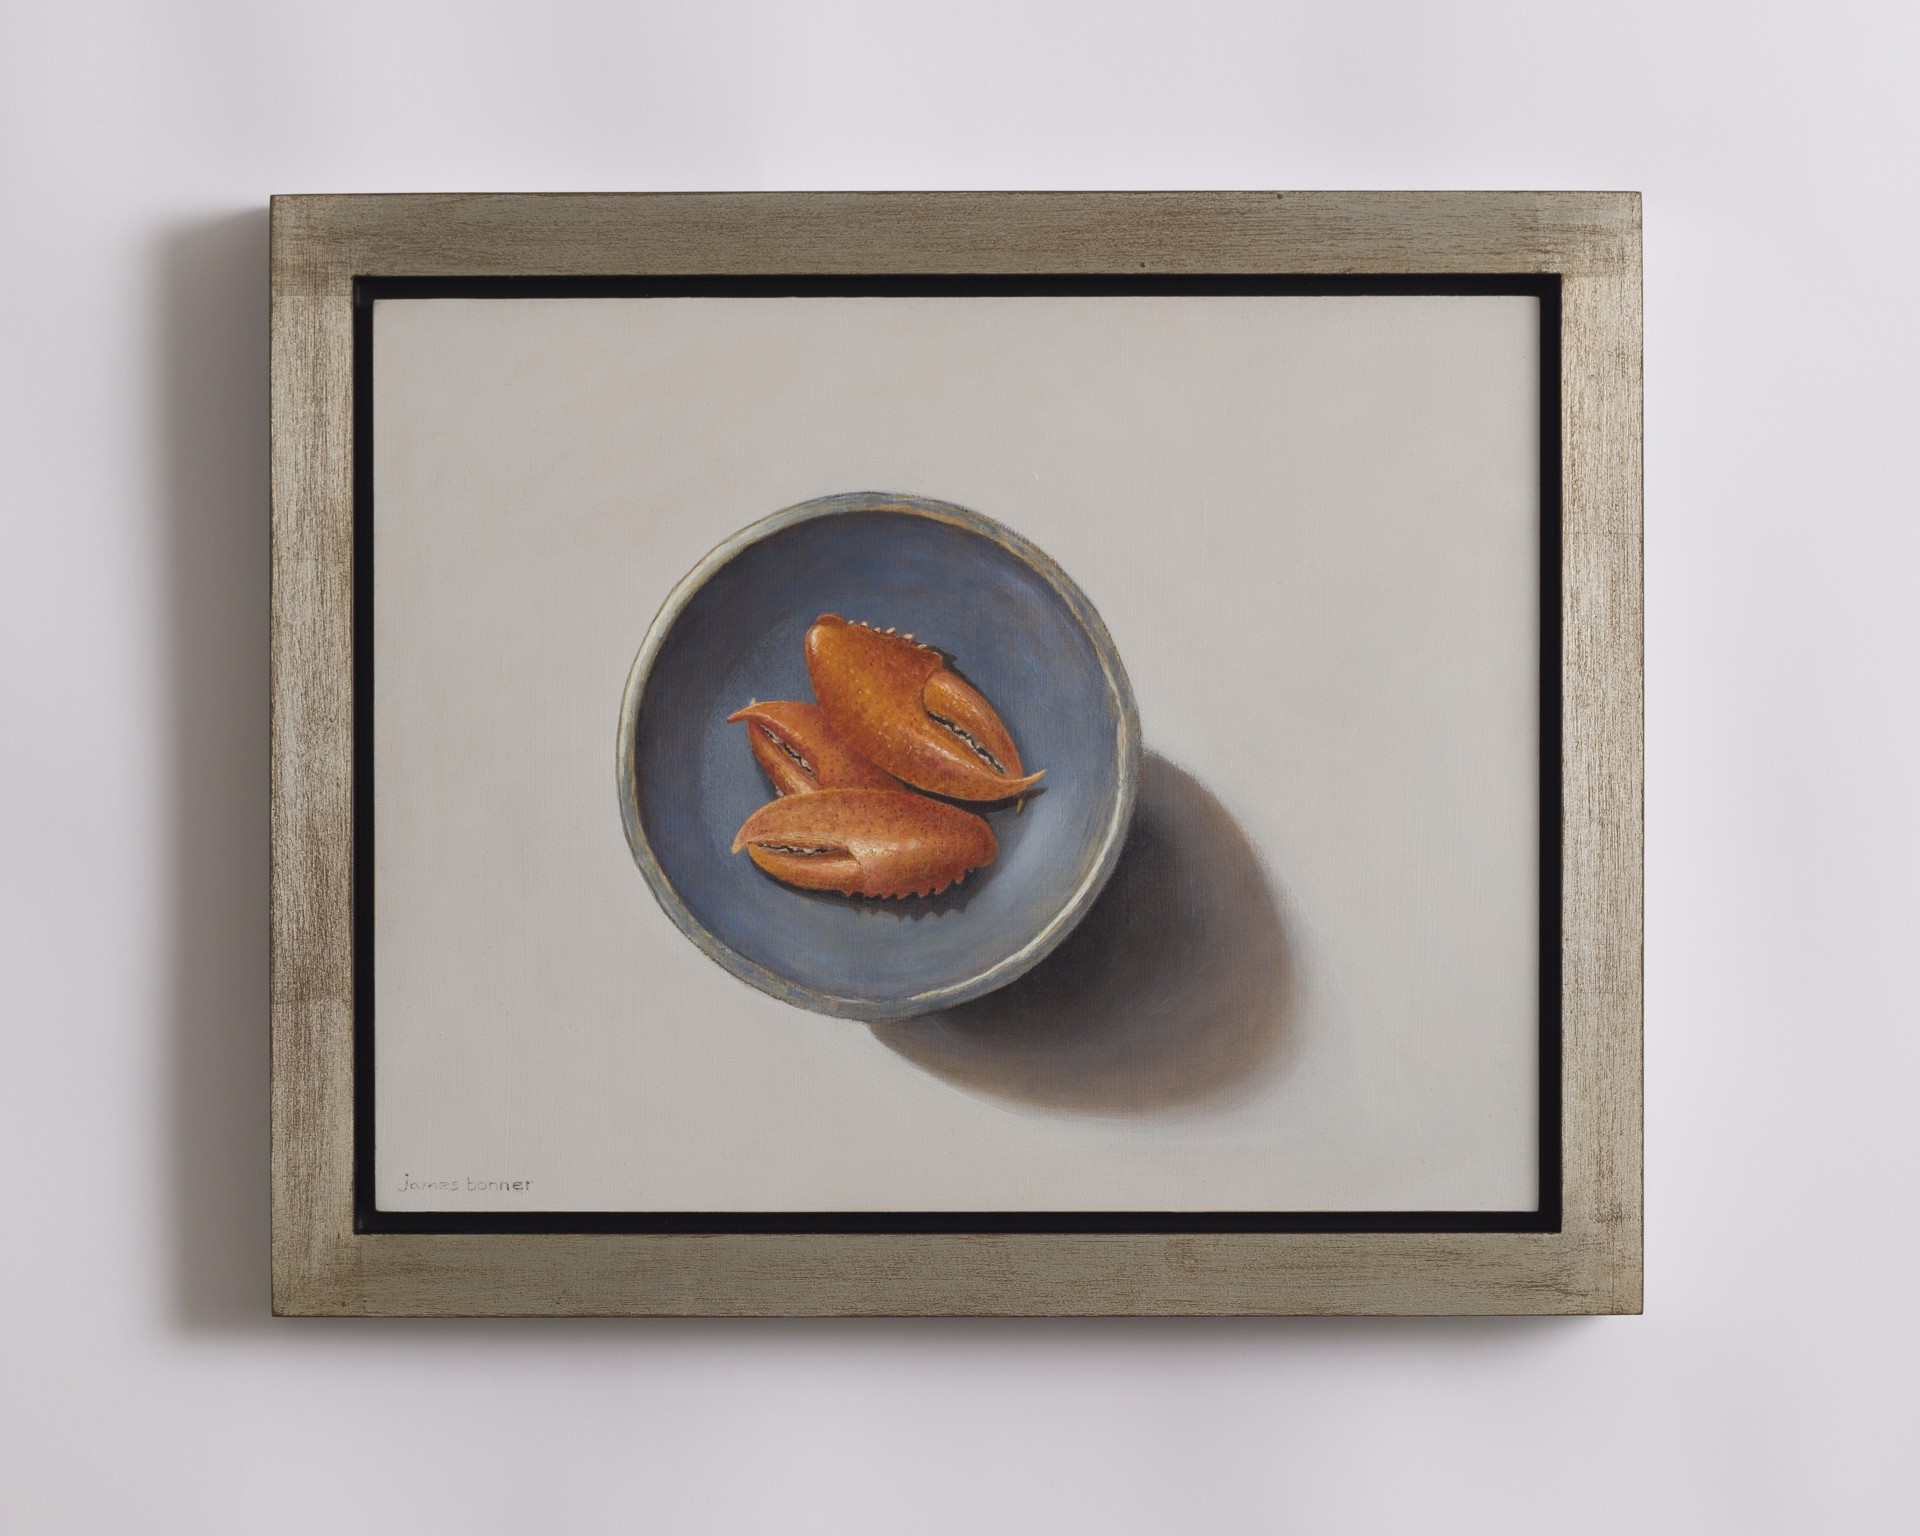 Lobster Claws in Shaker Bowl by James Bonner